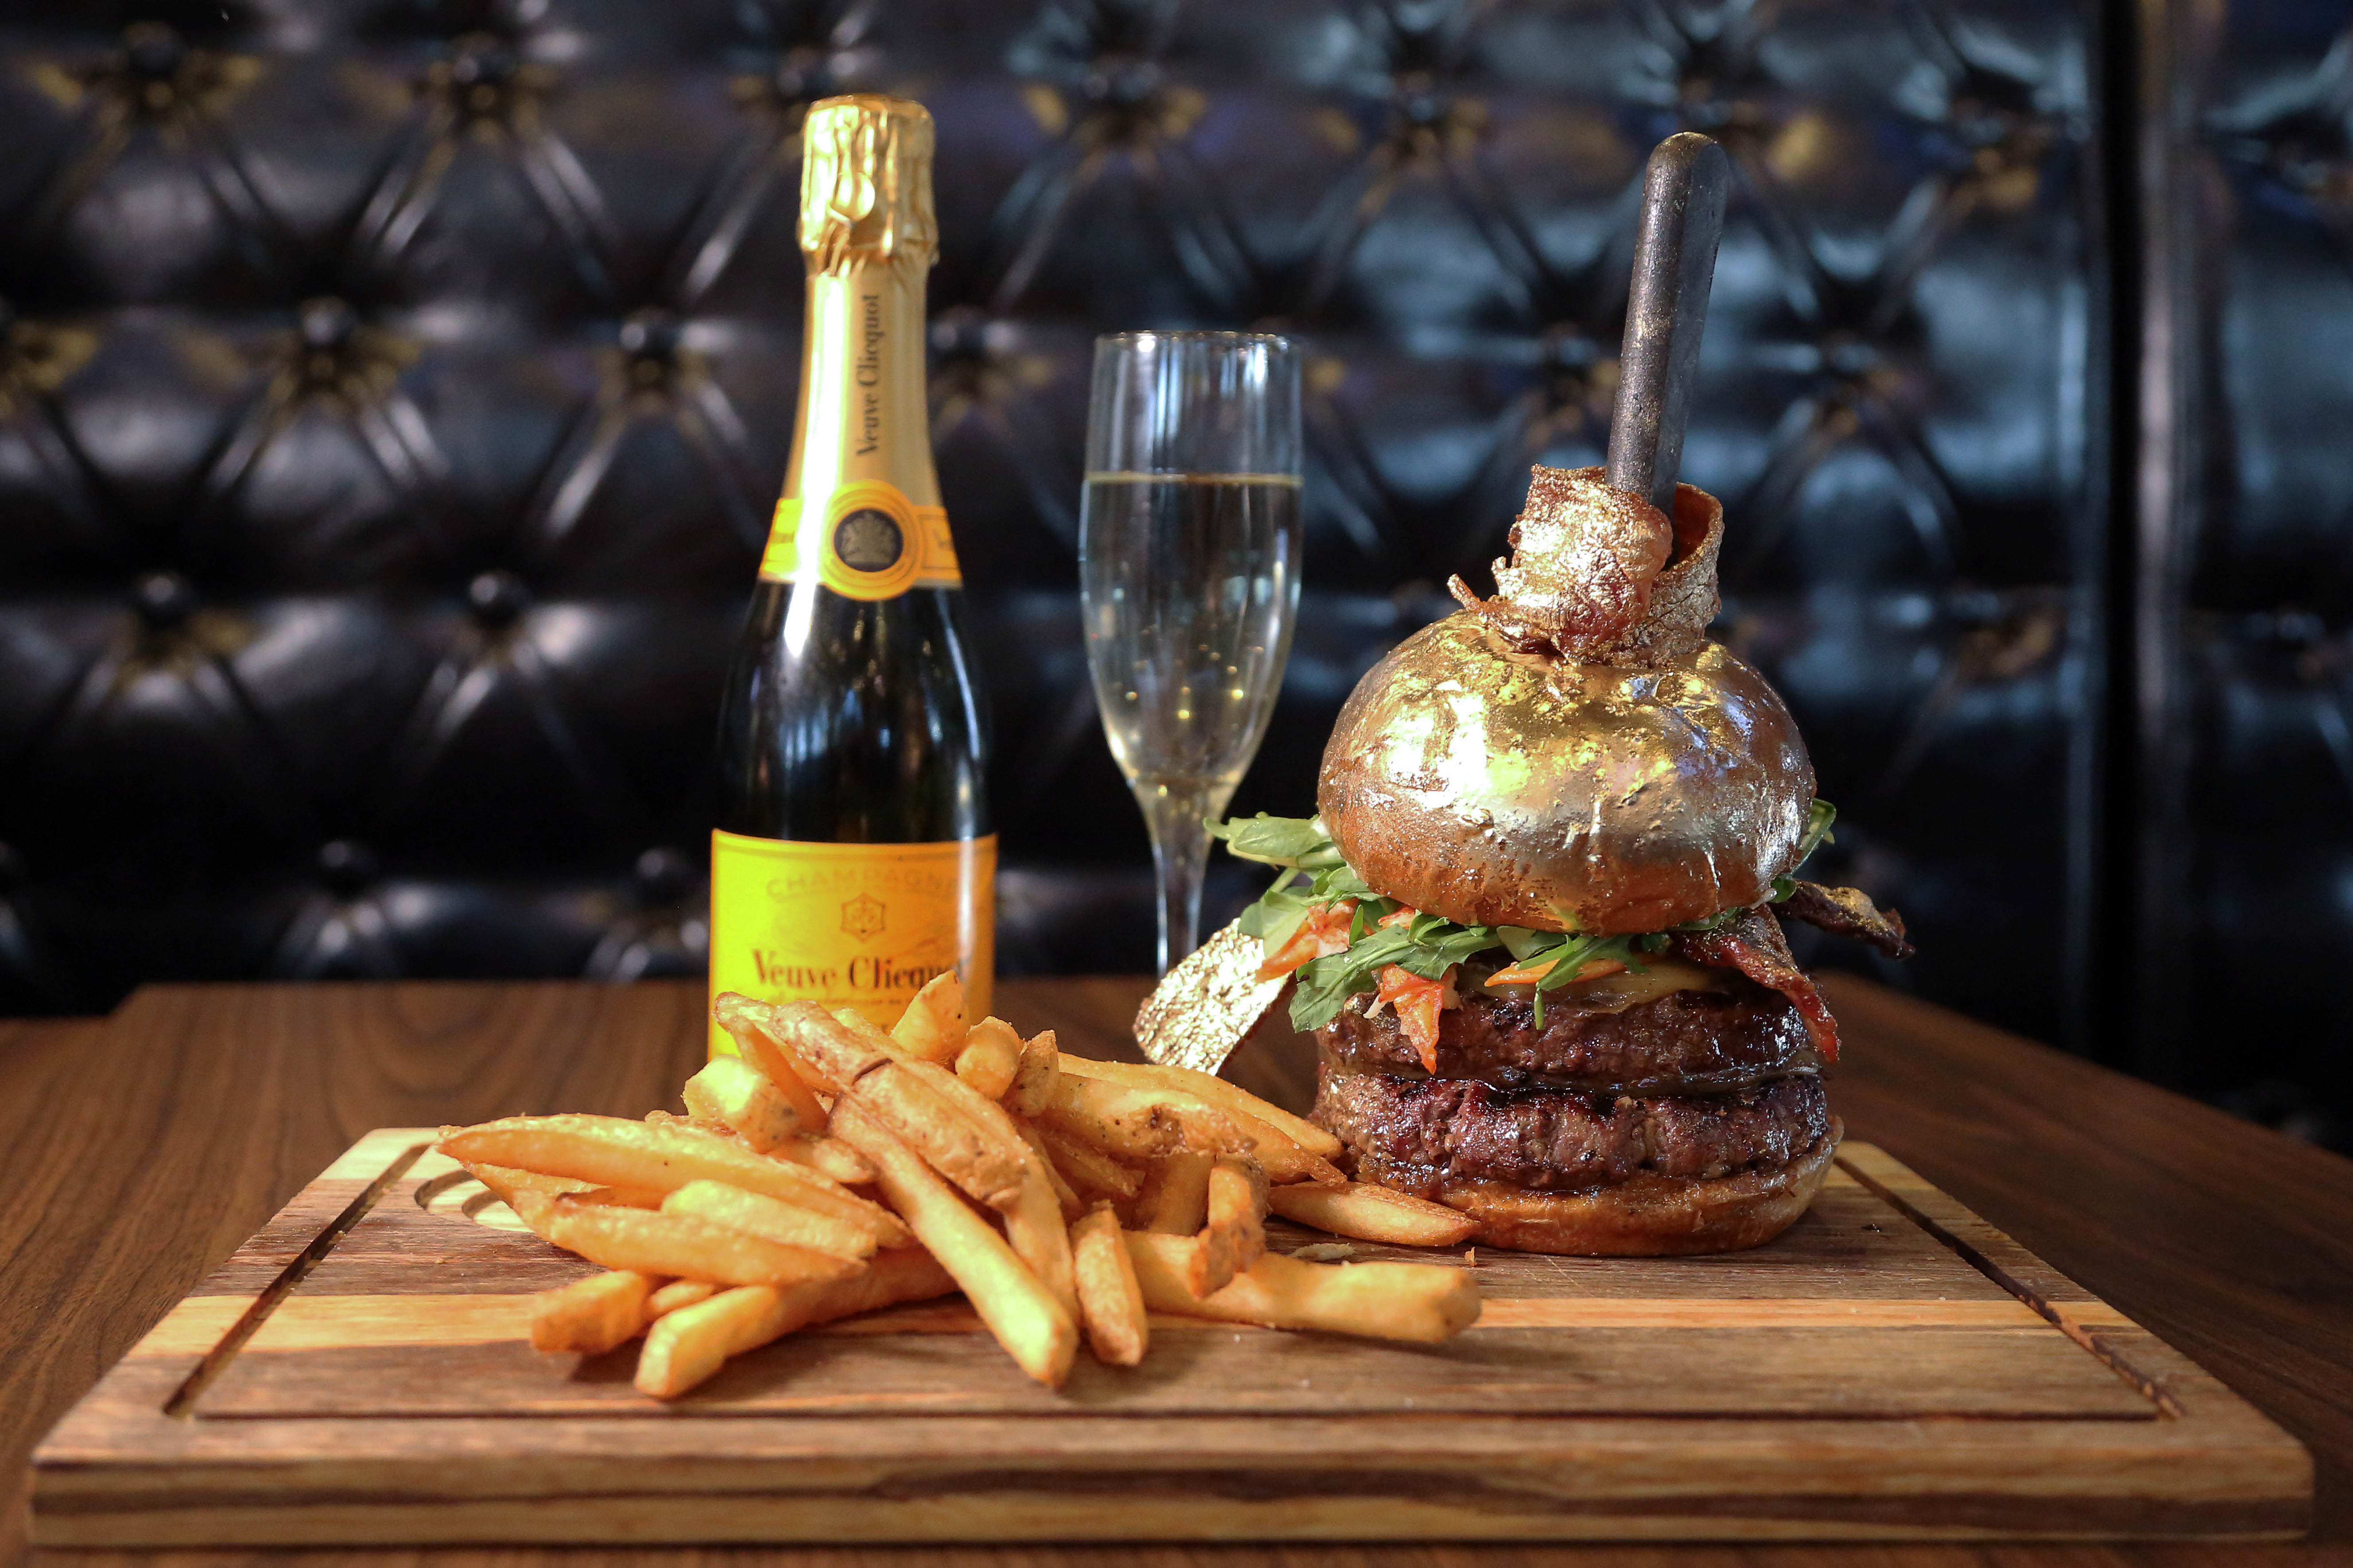 Slater's 50/50 serves a 24K burger made with real gold, Food